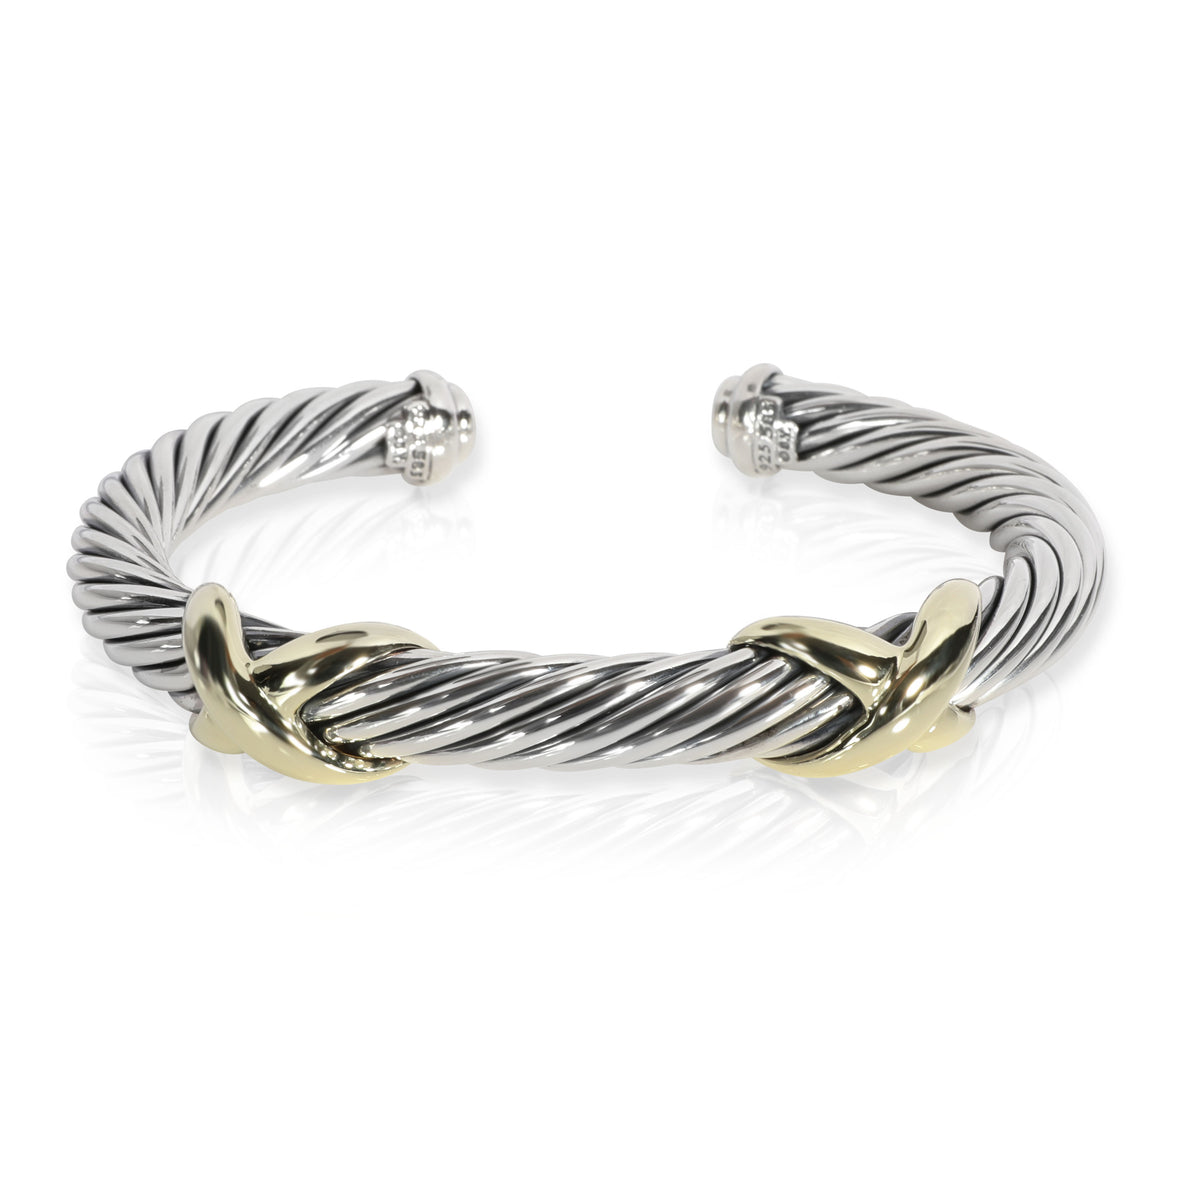 David Yurman Cable X Bangle in 14K Yellow Gold/Sterling Silver